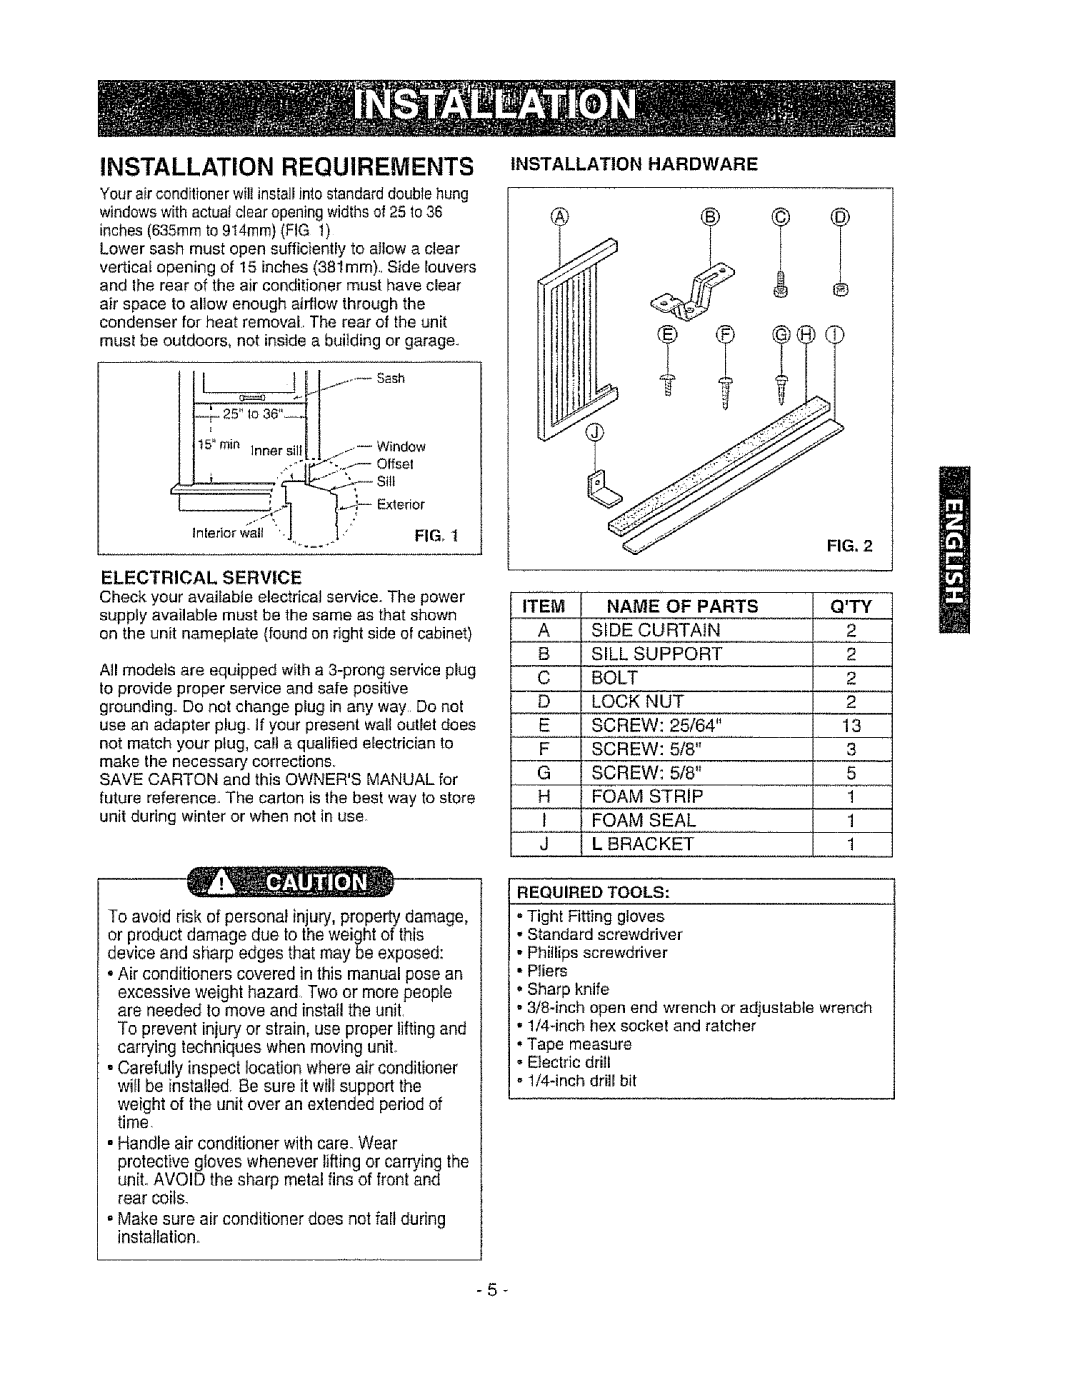 Kenmore 580. 72089 owner manual Installation Requirements, Installation Hardware, Item 